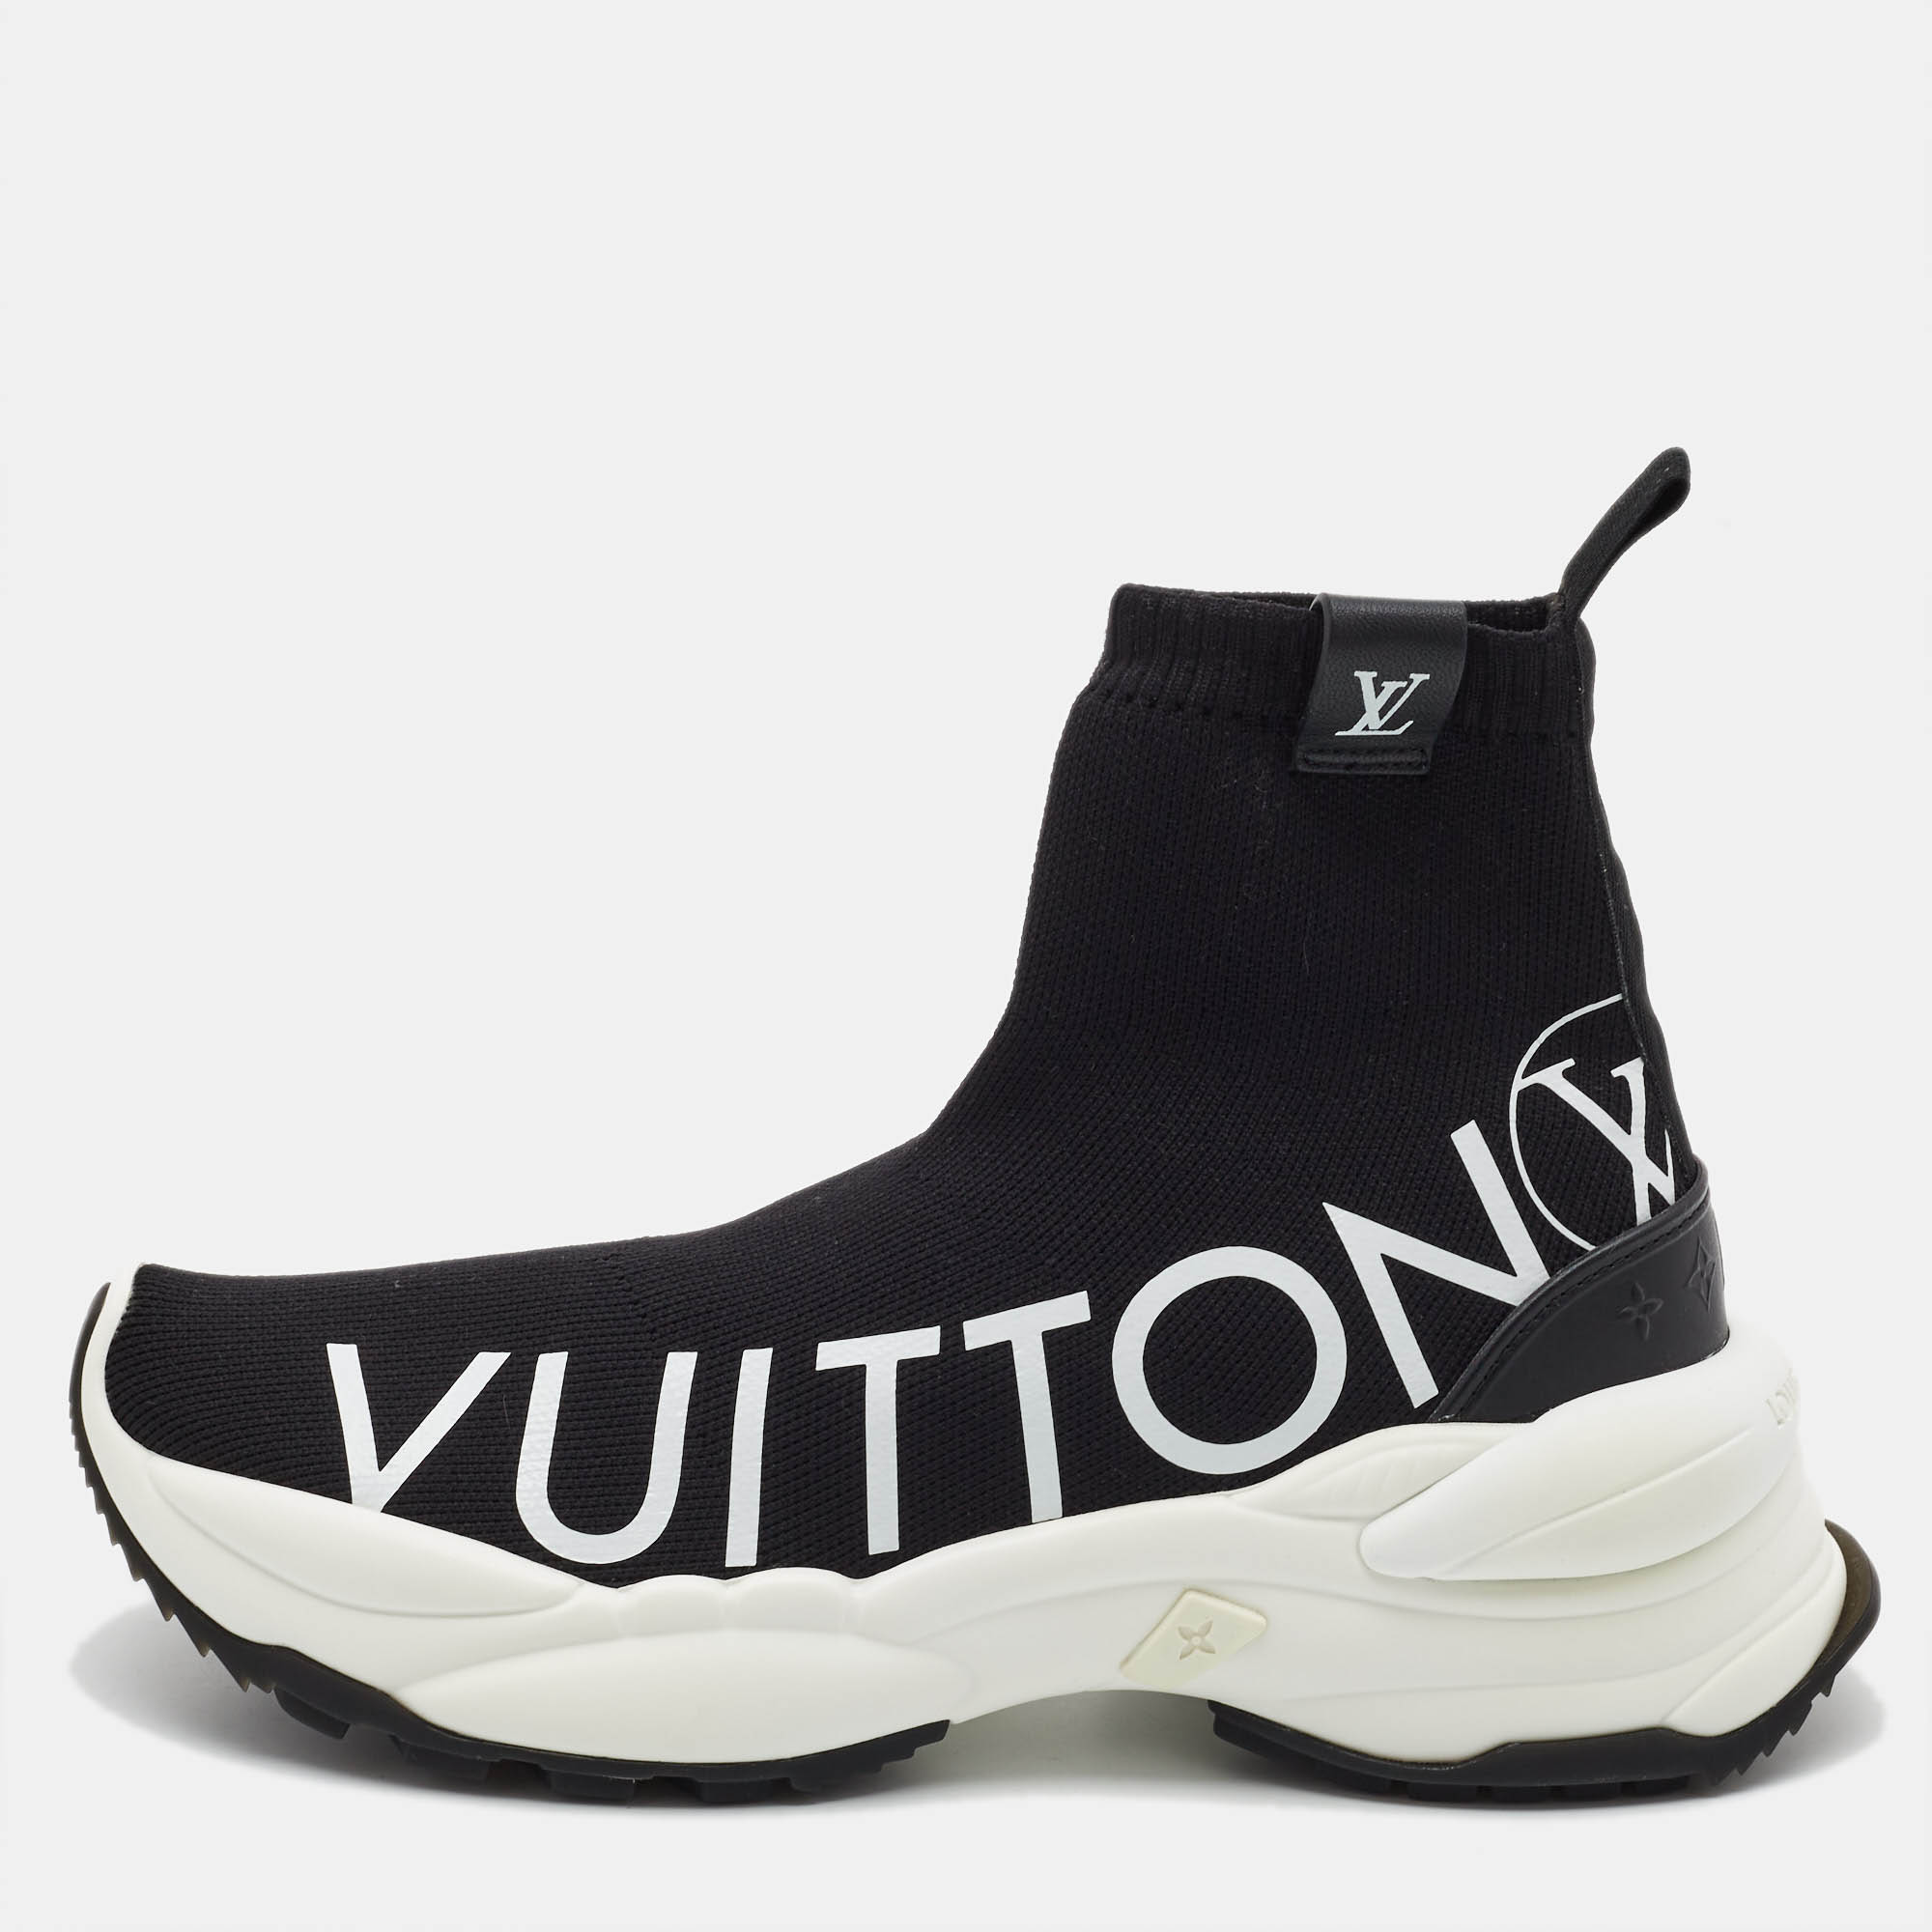 Louis vuitton black knit fabric high top sneakers size 38